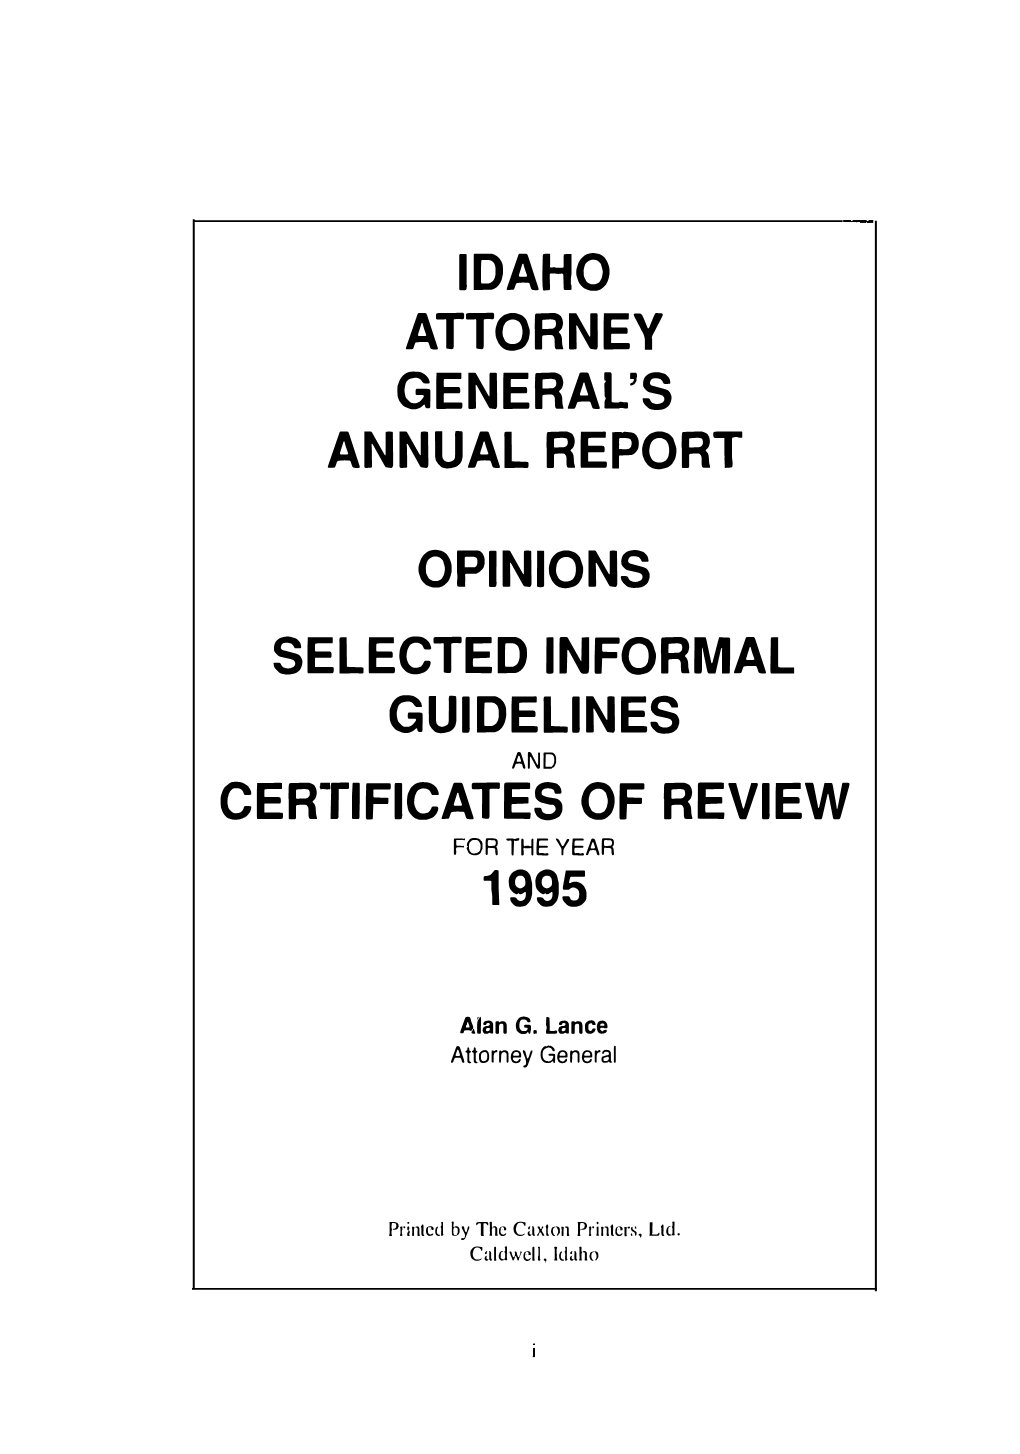 Annual Report of the Attorney General 1995